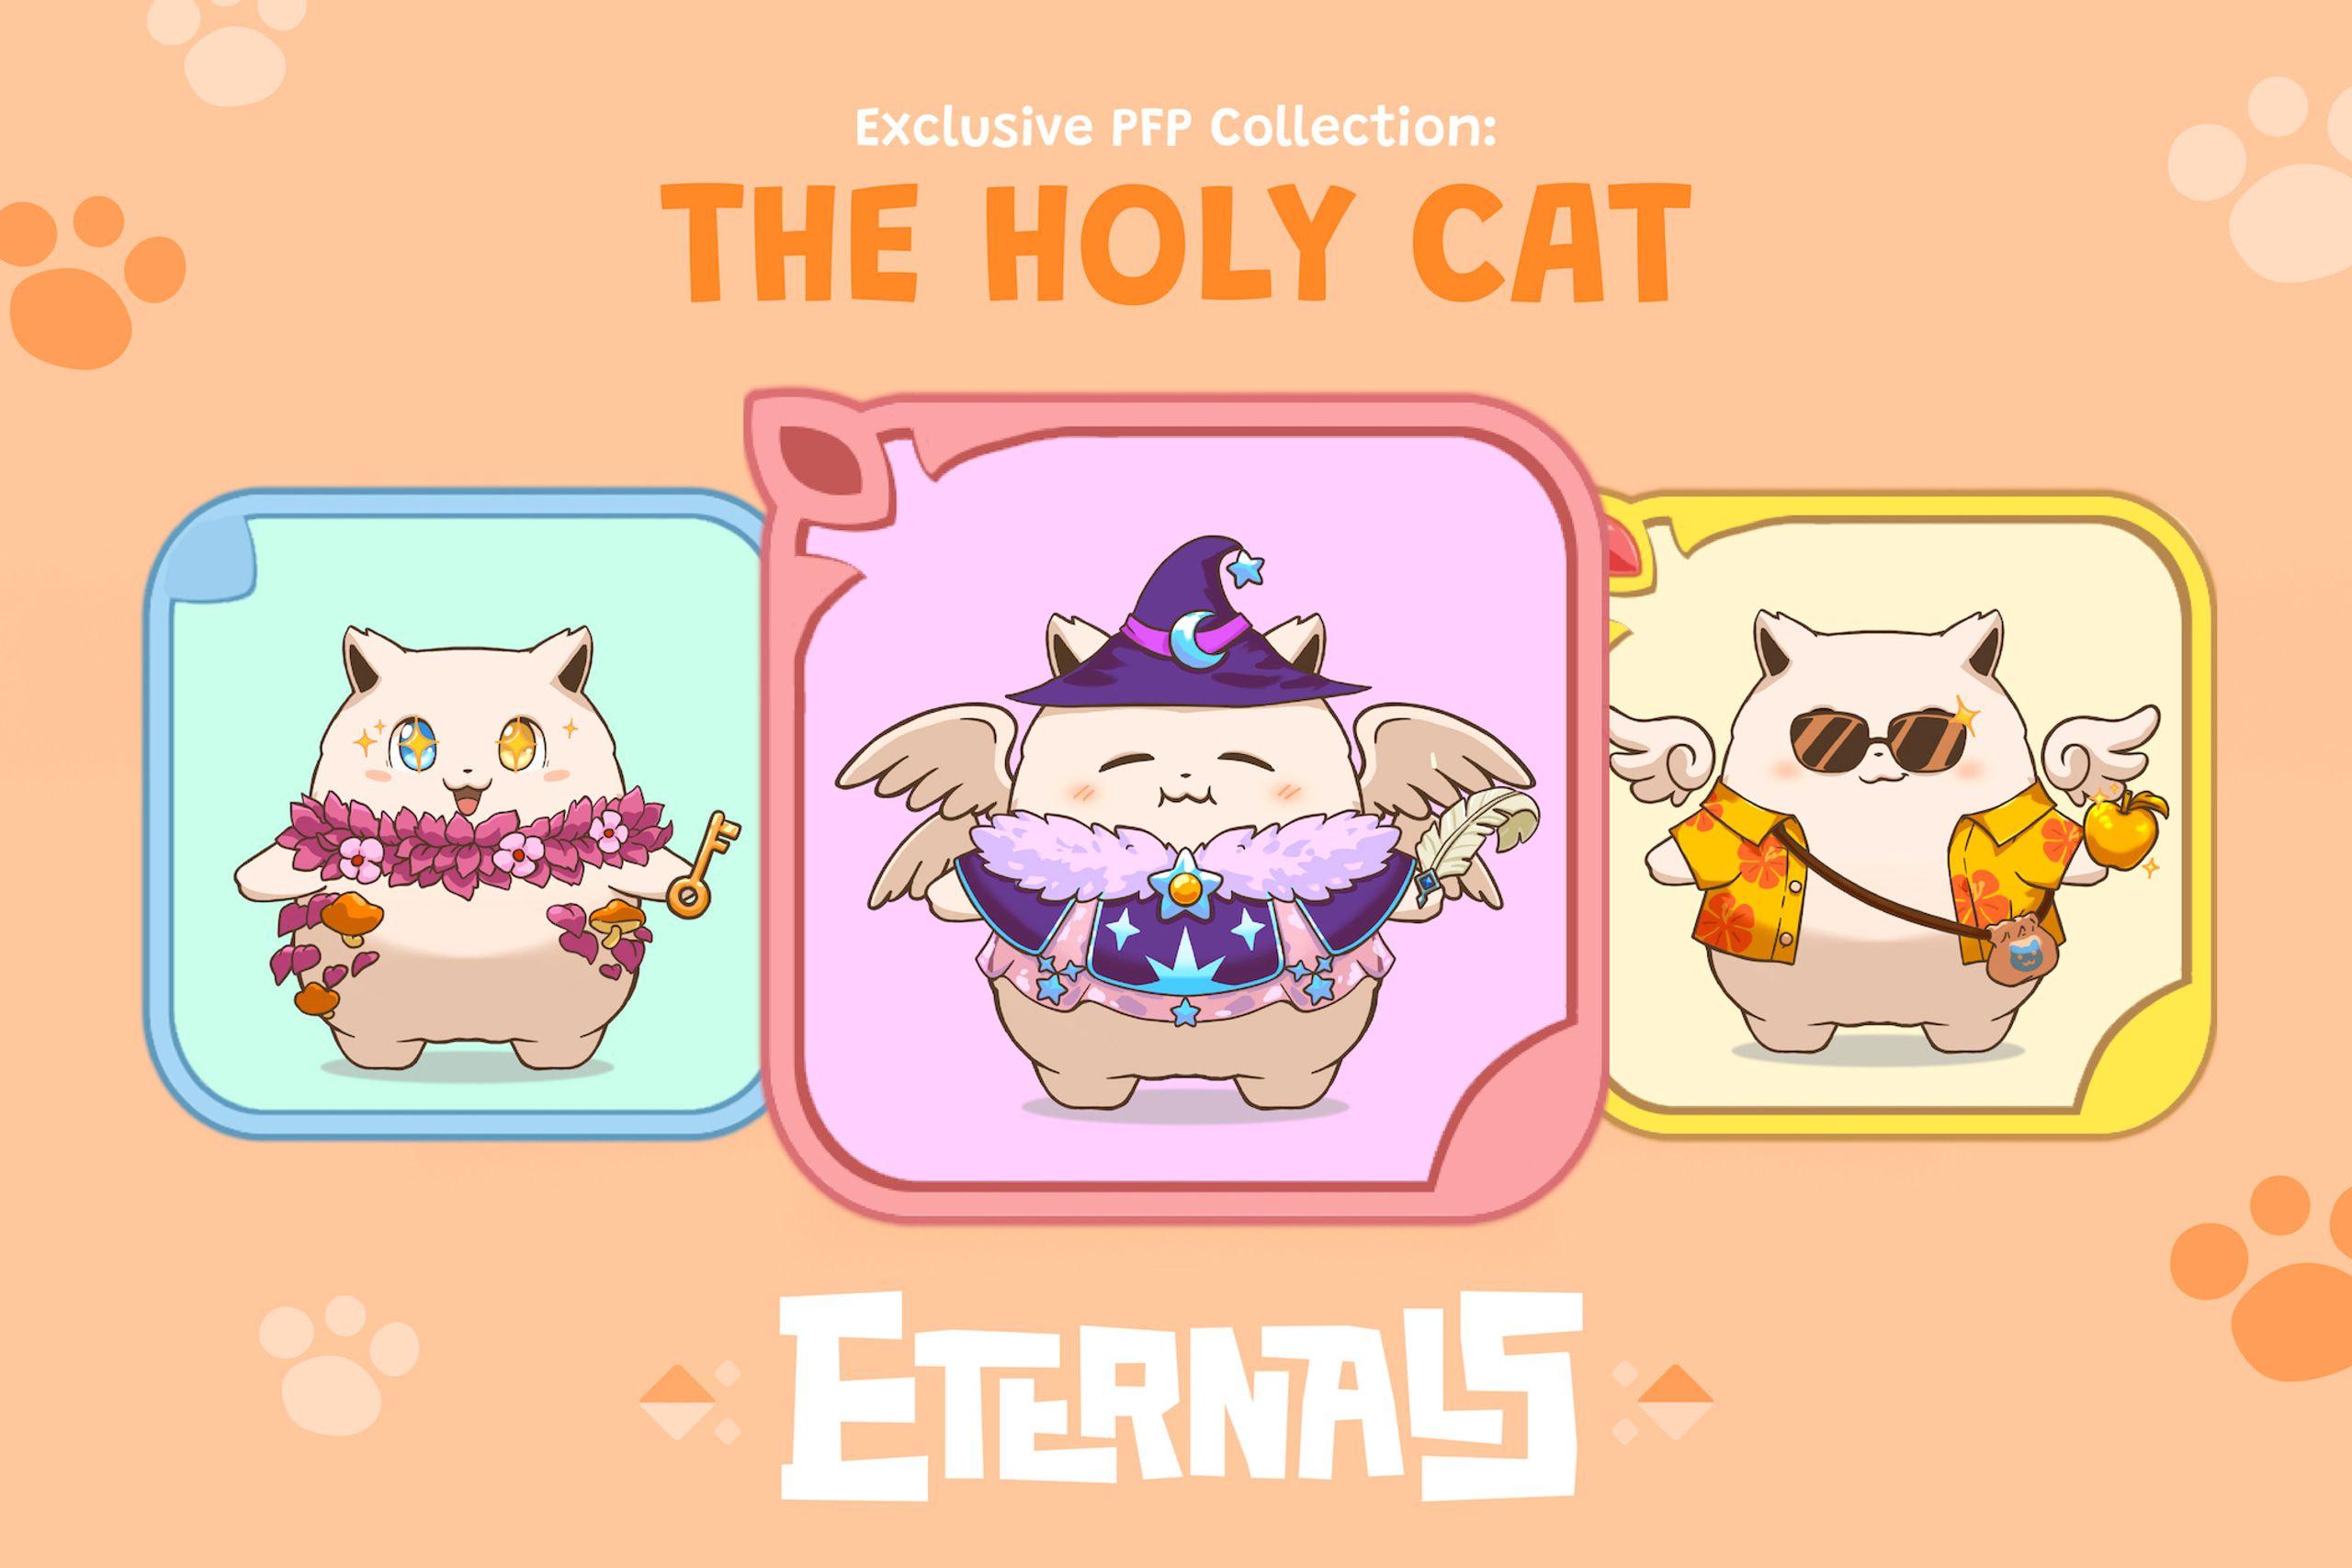 Essential Things You Need To Know About Eternals: The Holy Cat PFPs & Dynamic NFTs